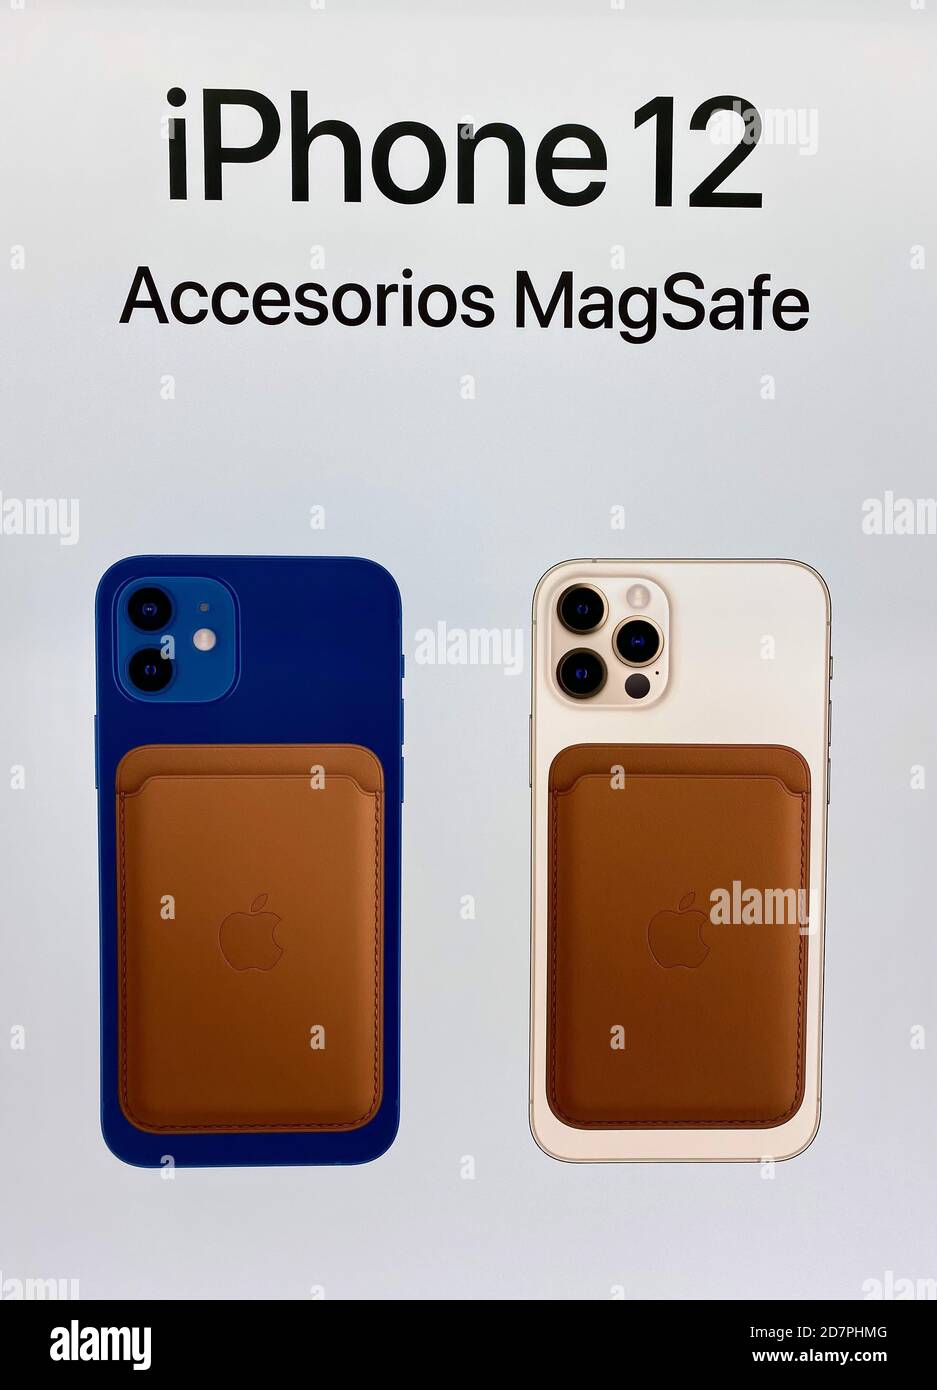 Oviedo Spain October 24 Advertising Poster On An App Store Announcing The Iphone 12 Pro Accessories Magsafe Stock Photo Alamy